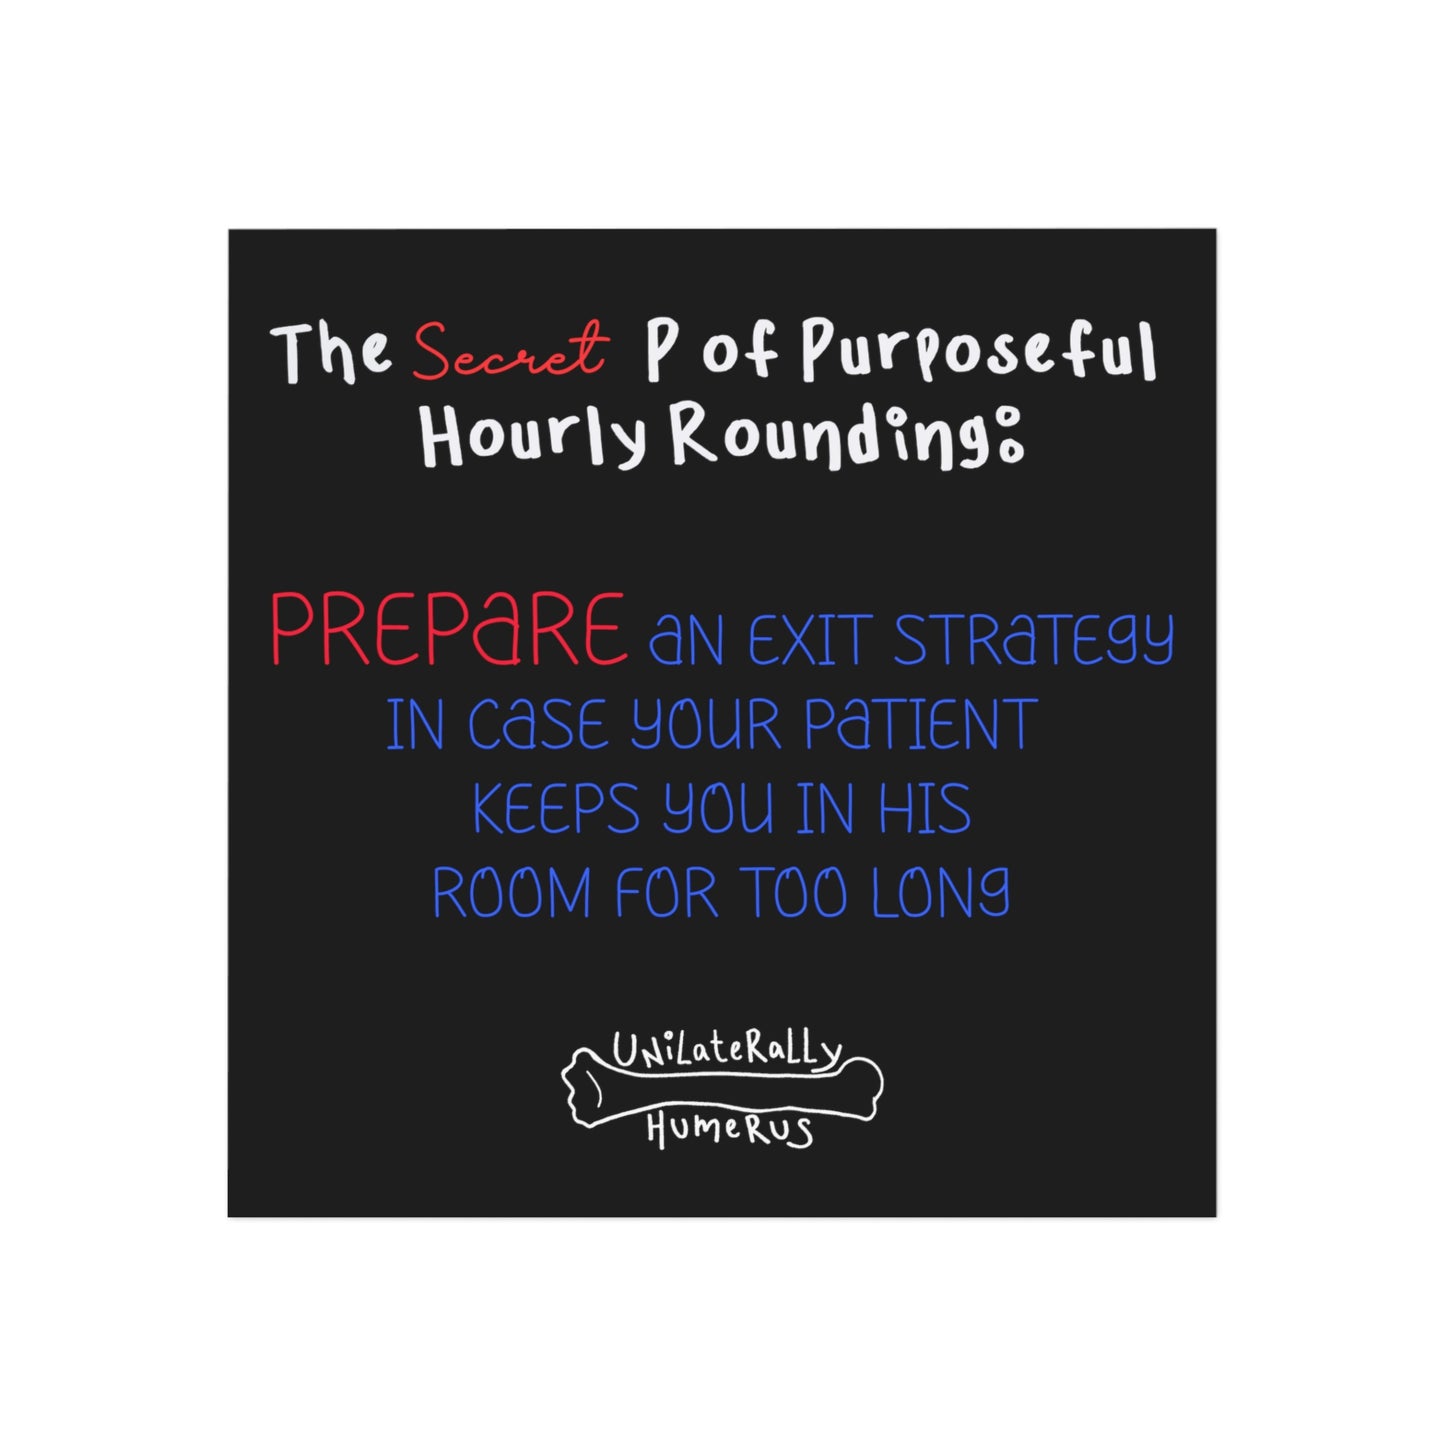 The Secret P of Purposeful Hourly Rounding Square Magnet! Nurse Gift! Nursing Assistant Gift! SNF or Hospital!